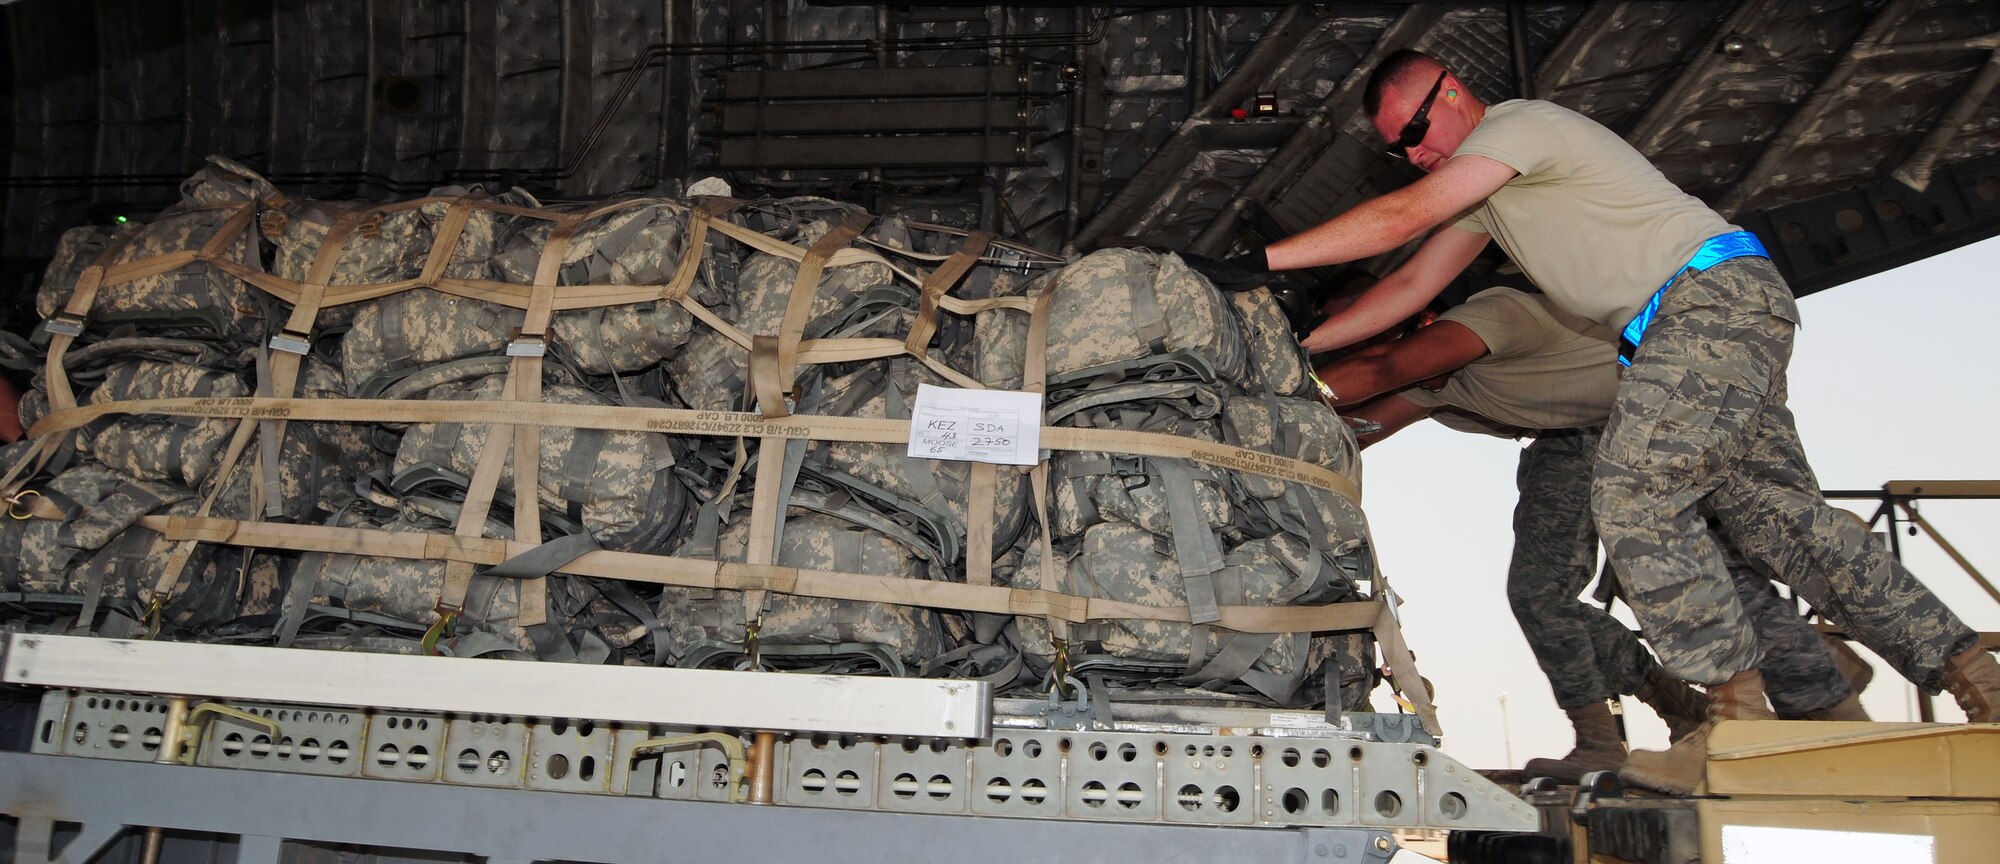 SOUTHWEST ASIA --Tech Sgt. Michael Peppers, 386th Expeditionary Logistics Readiness Squadron Air Terminal Operation Center member, moves a cargo pallet into position aboard a C-17 Globemaster III on the 386th Air Expeditionary Wing parking ramp at an undisclosed location in Southwest Asia Aug. 21, 2009.  Sergeant Peppers is deployed from the 914th Airlift Wing, Niagara Falls Air Reserve Station, N.Y.  (U.S. Air Force photo / Tech Sgt. Tony Tolley)